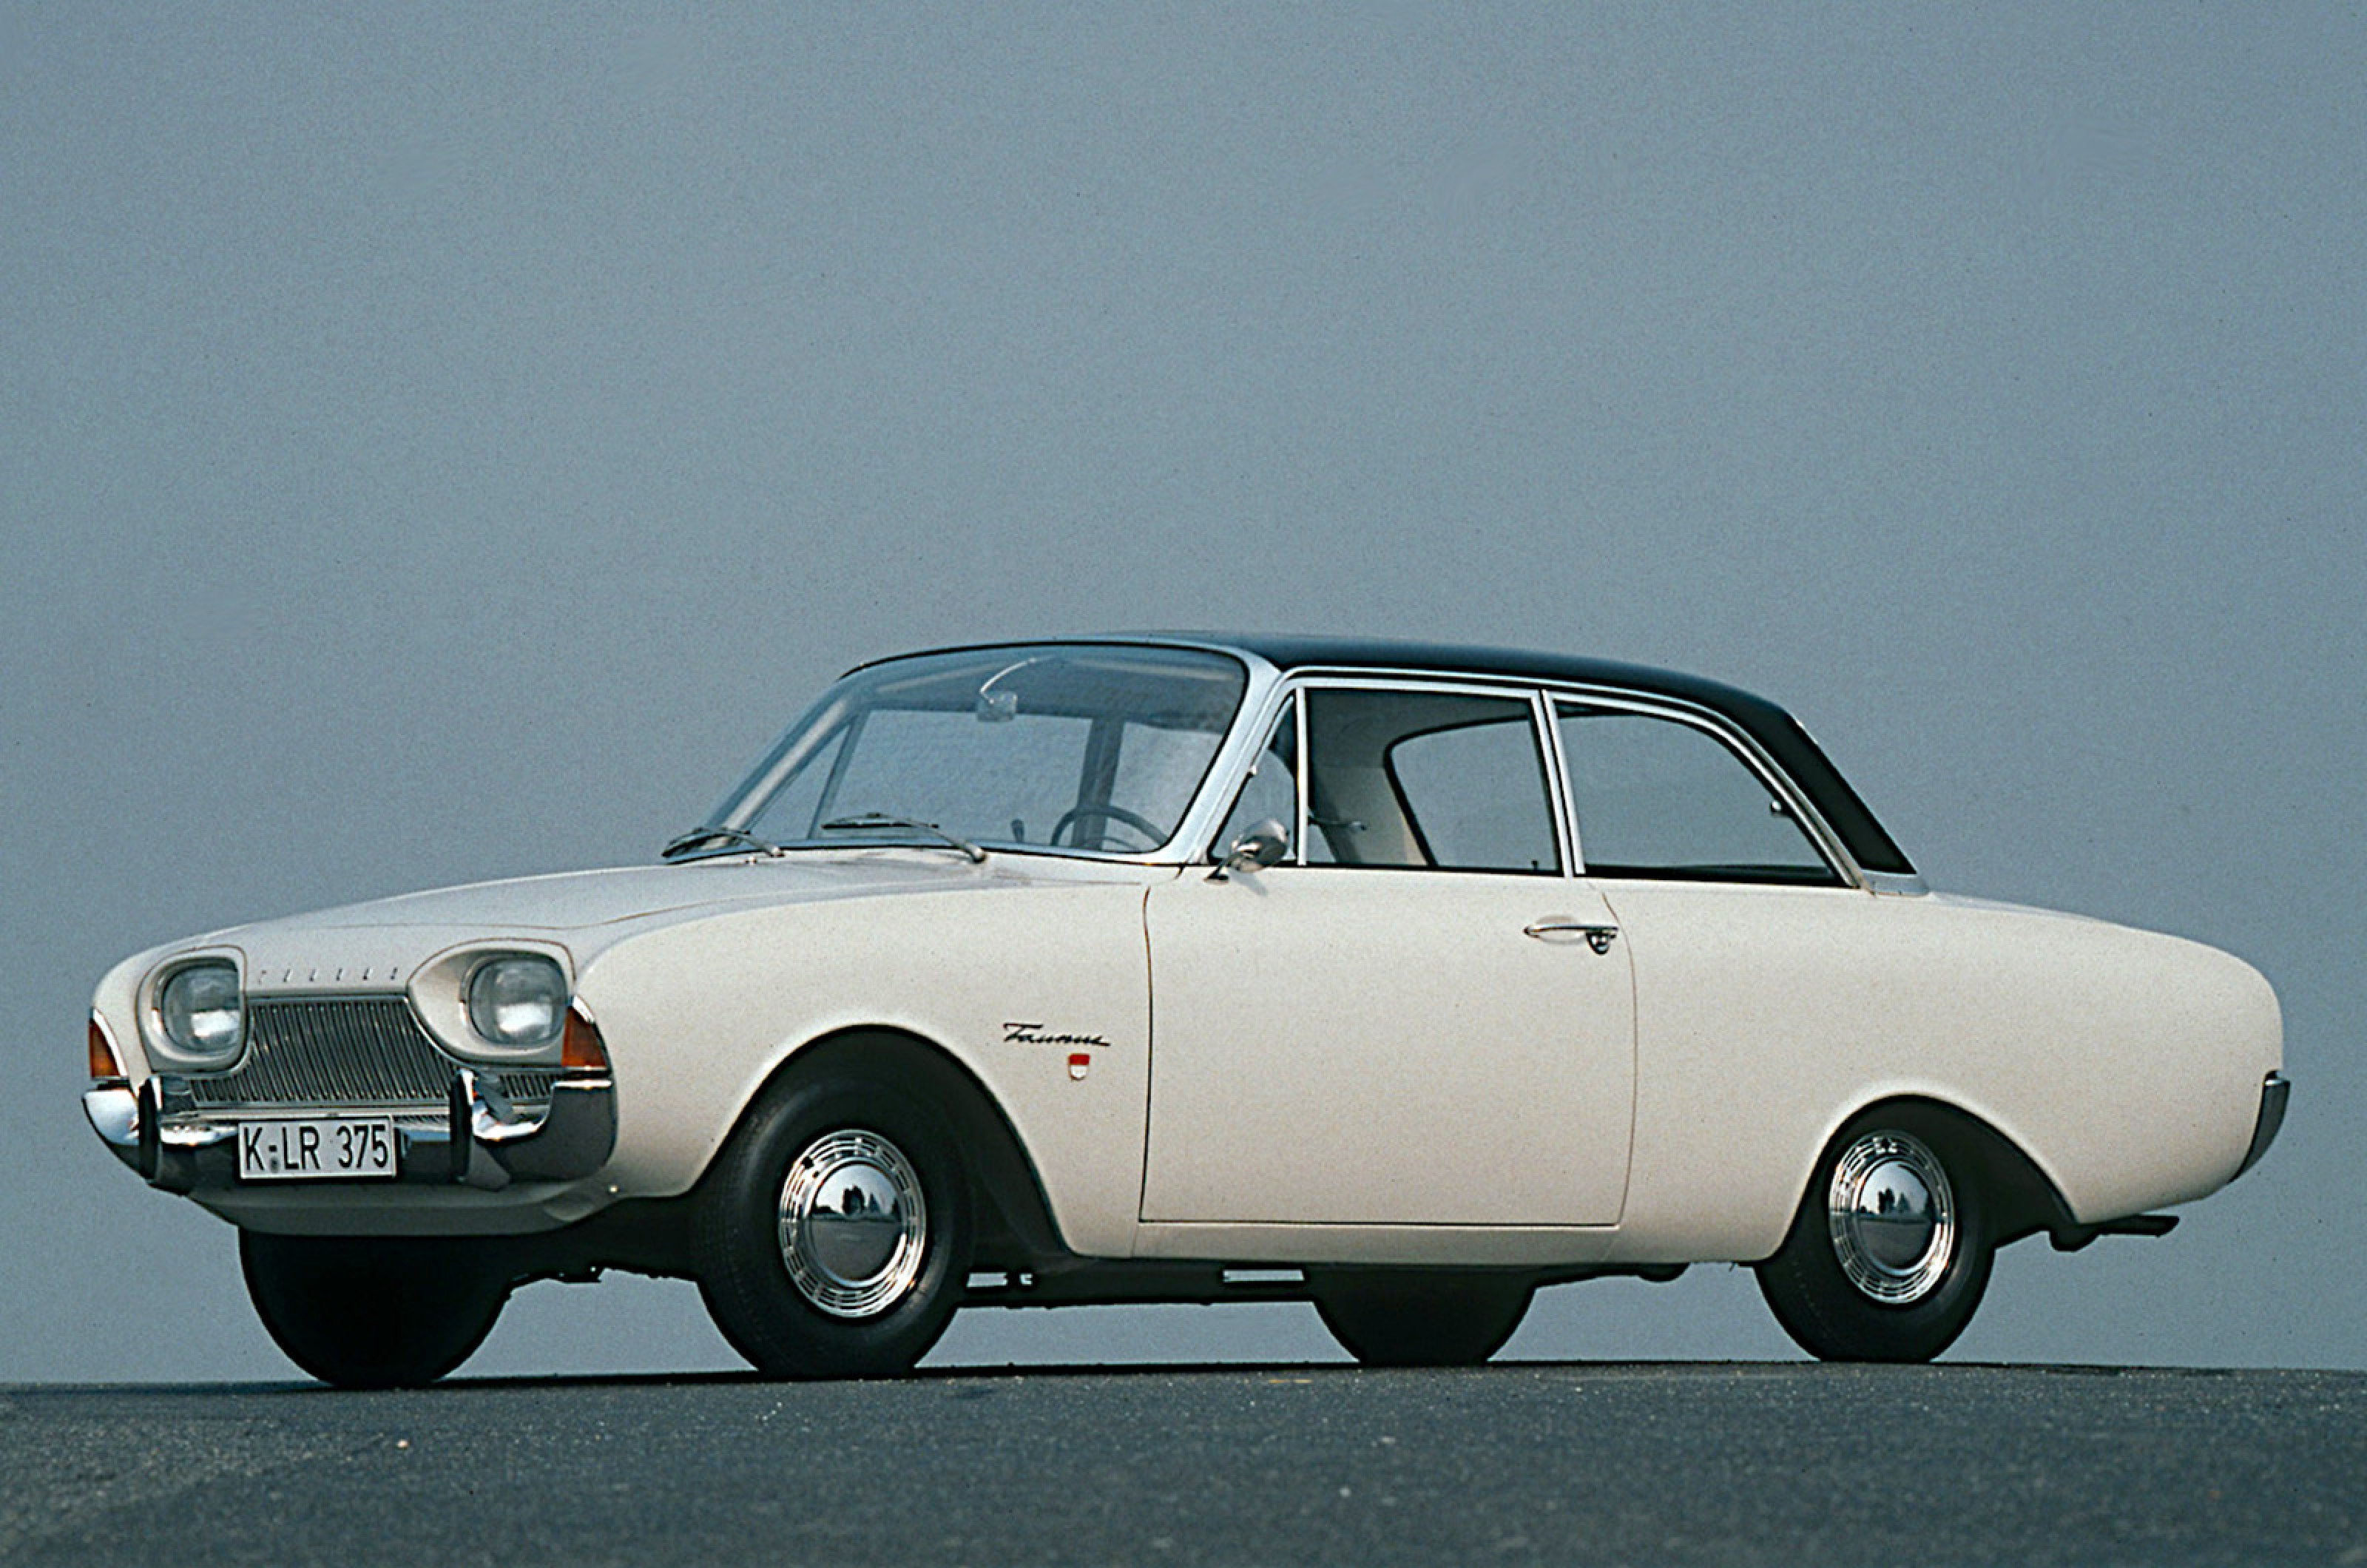 <p>After all the excitement about the design of the P2 Barocktaunus, Ford of Germany completely changed direction with its successor, the P3, which was nicknamed the Badewanne, or ‘bath tub’.</p>  <p>One of the many changes was a front end which resembled the bullet shape of the contemporary Thunderbird, though in the case of the Taunus it was considerably less pronounced.</p>  <p>The similarity was emphasized by the Taunus’s radical lozenge-shaped headlights, which were much wider than they were tall, and produced a similar effect to the twin lights on each side of the Thunderbird.</p>  <p>This would not have been possible on the Thunderbird, since by US regulations at the time a car could have either one or two headlights on each side, but they all had to be round.</p>